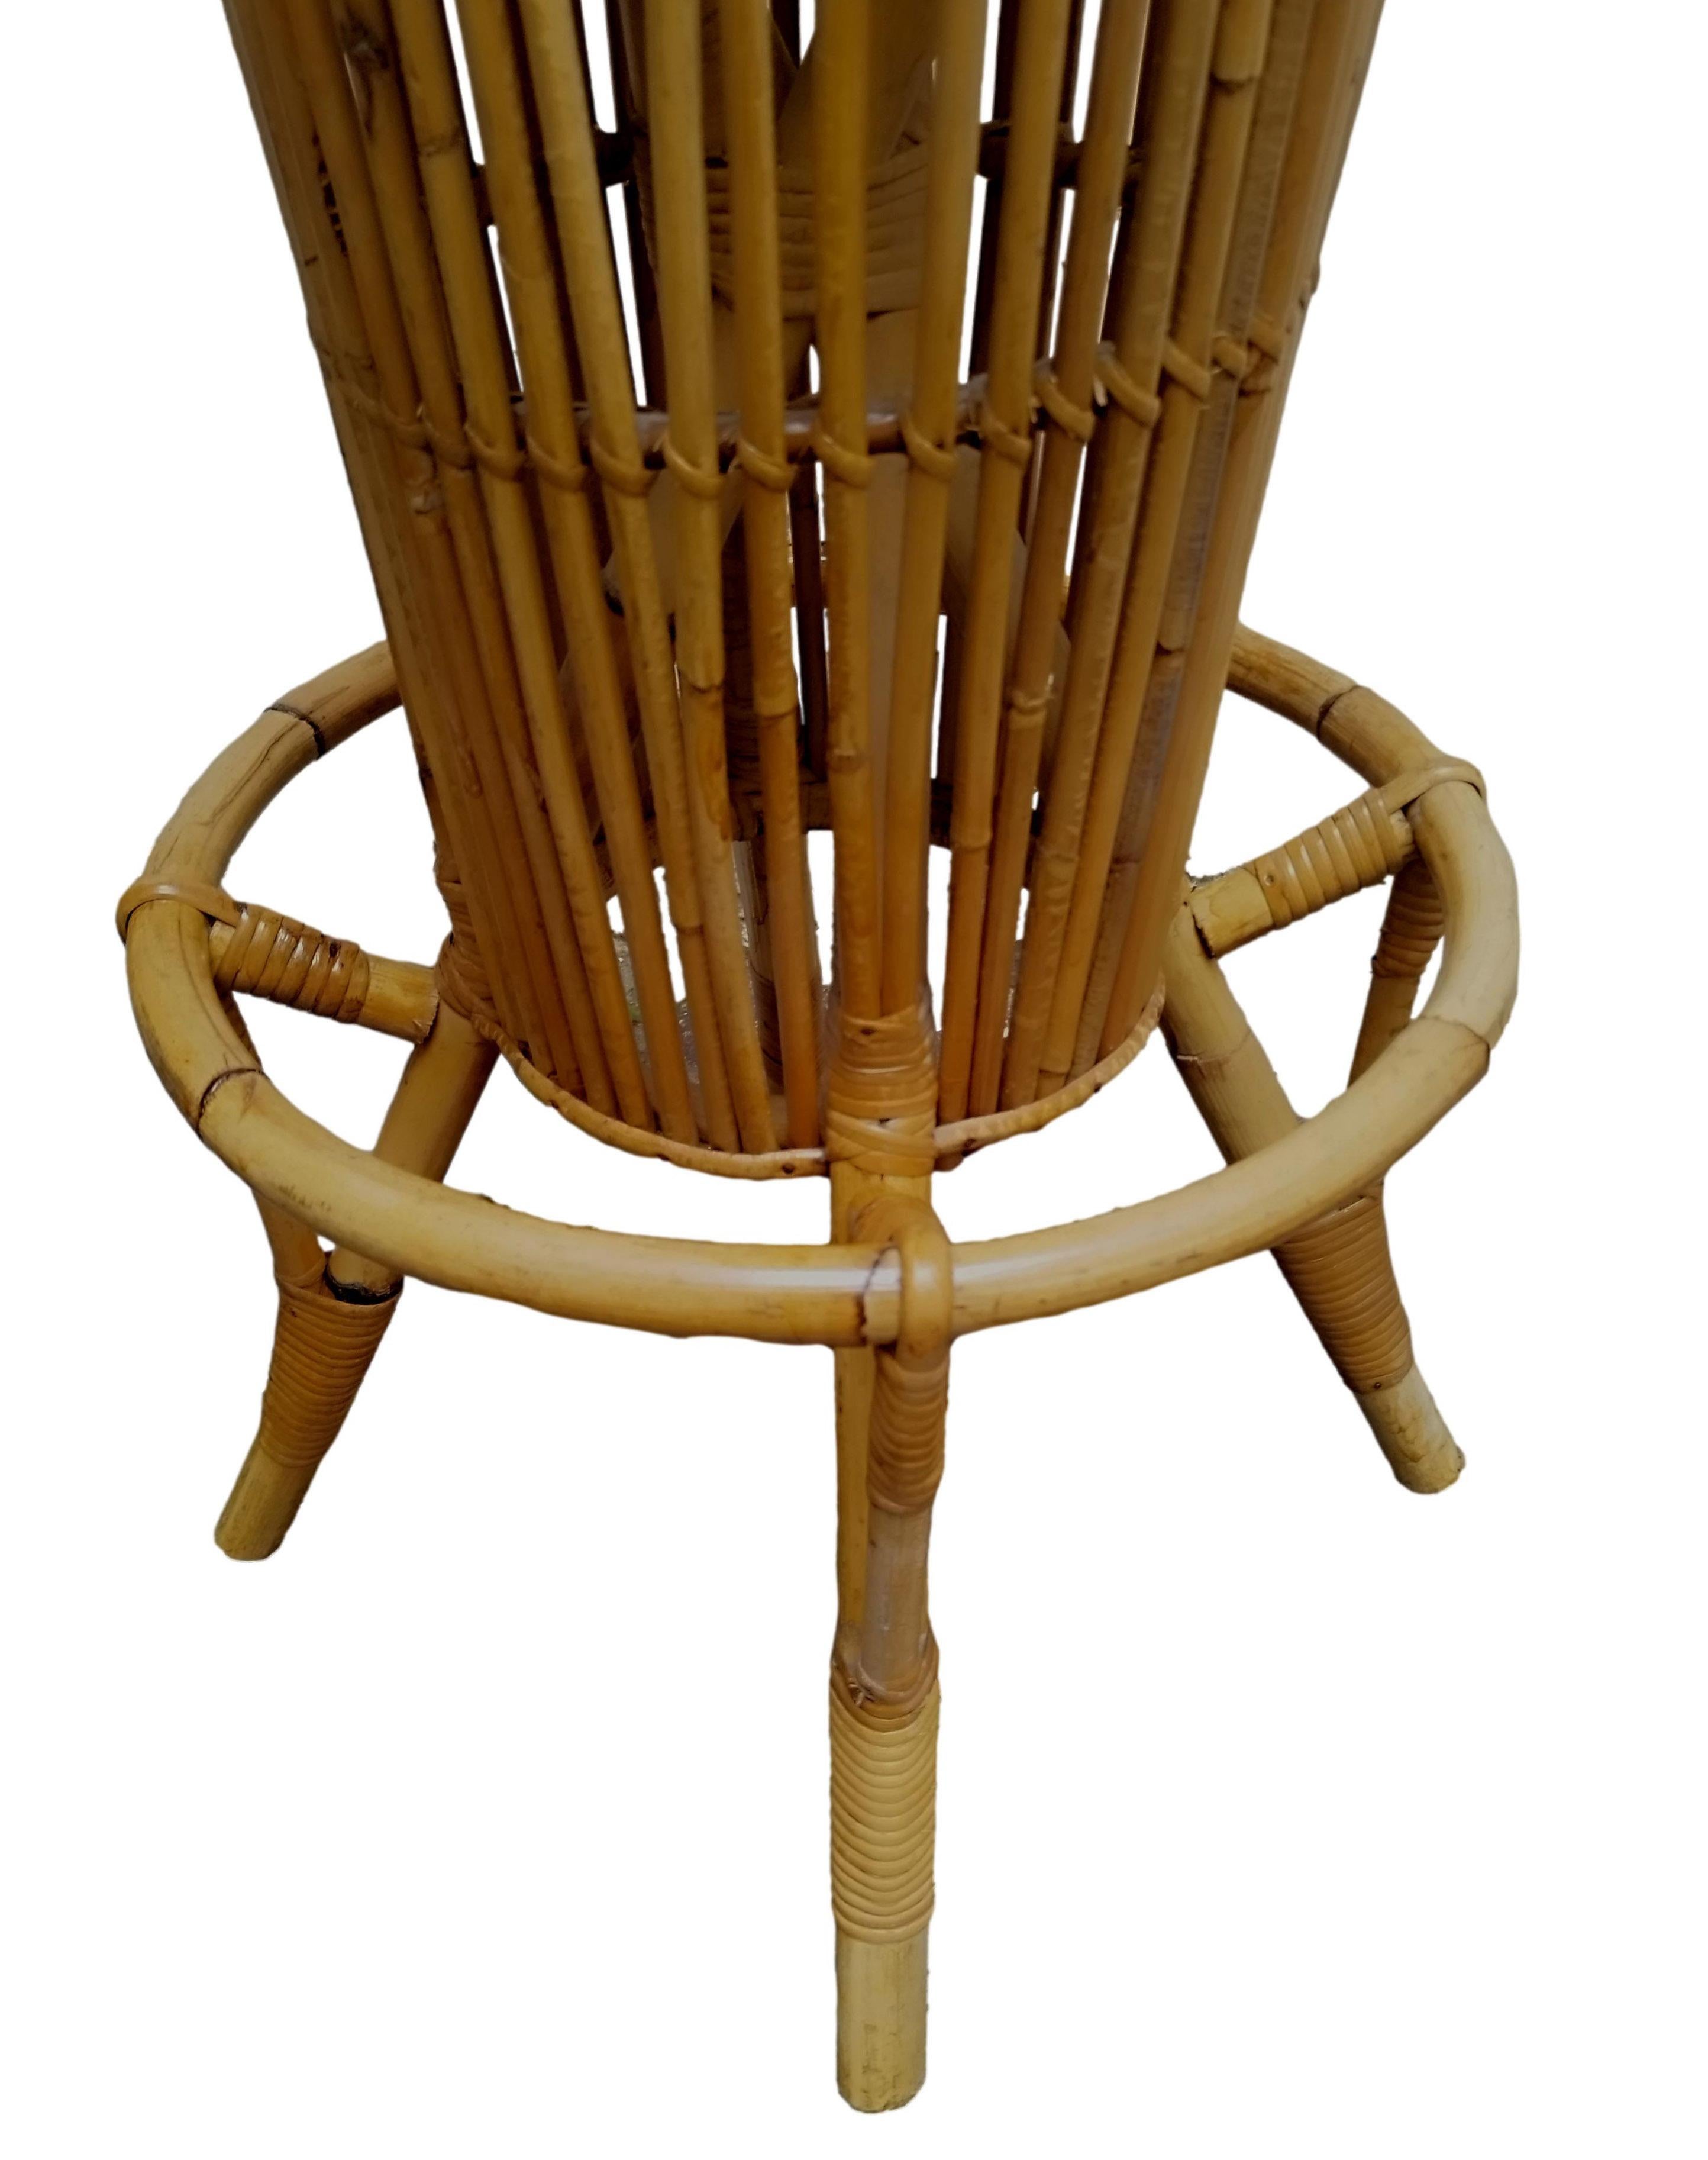 Tito Agnoli Attrib. Pair of Bamboo and Rattan Bar Stools, Italy 1960s For Sale 1